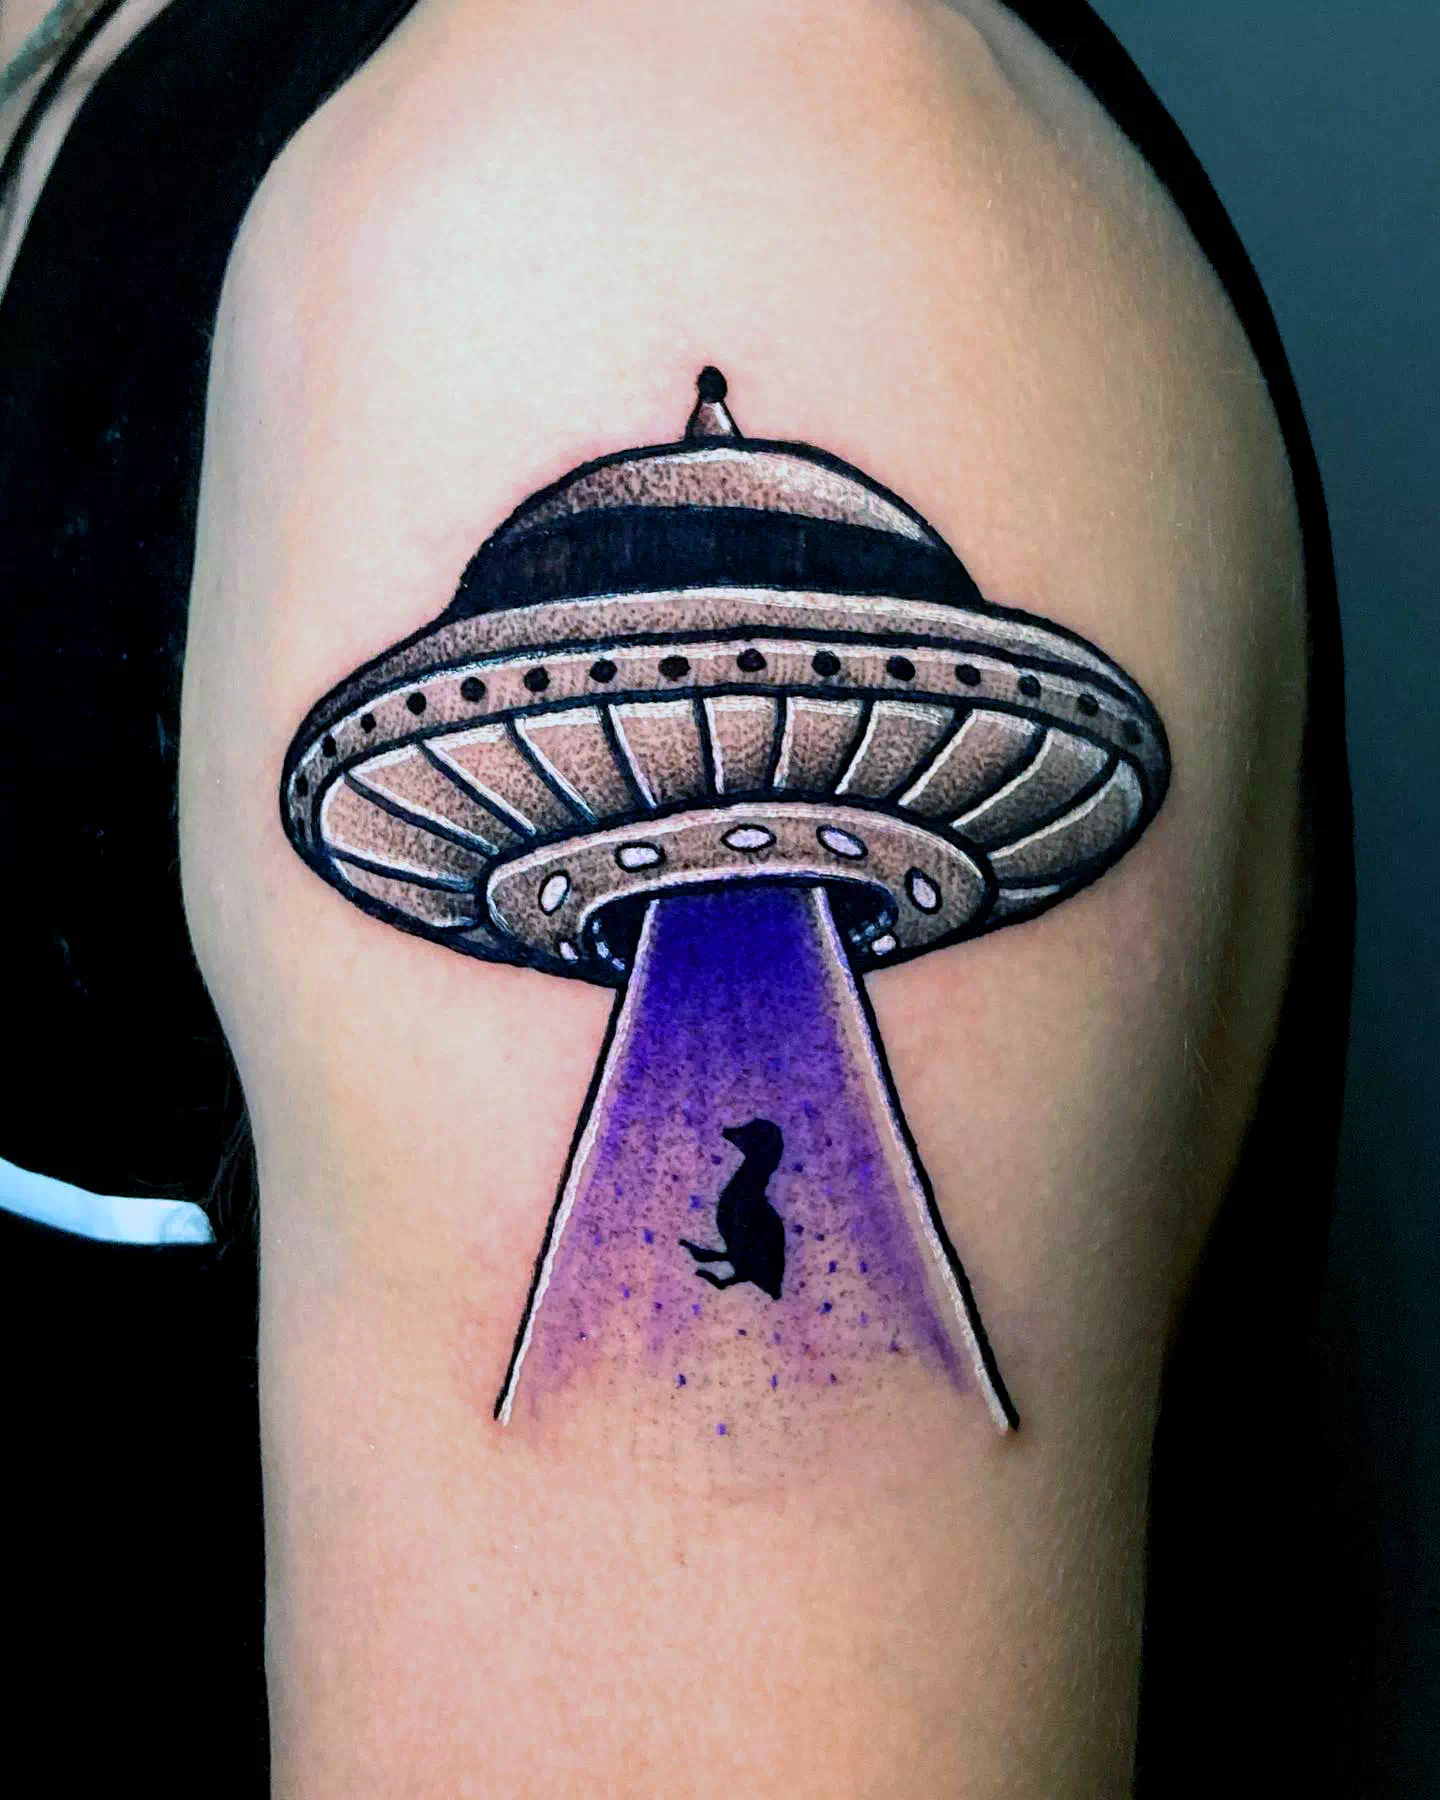 The Tiny Abduction Alien Tattoo 3